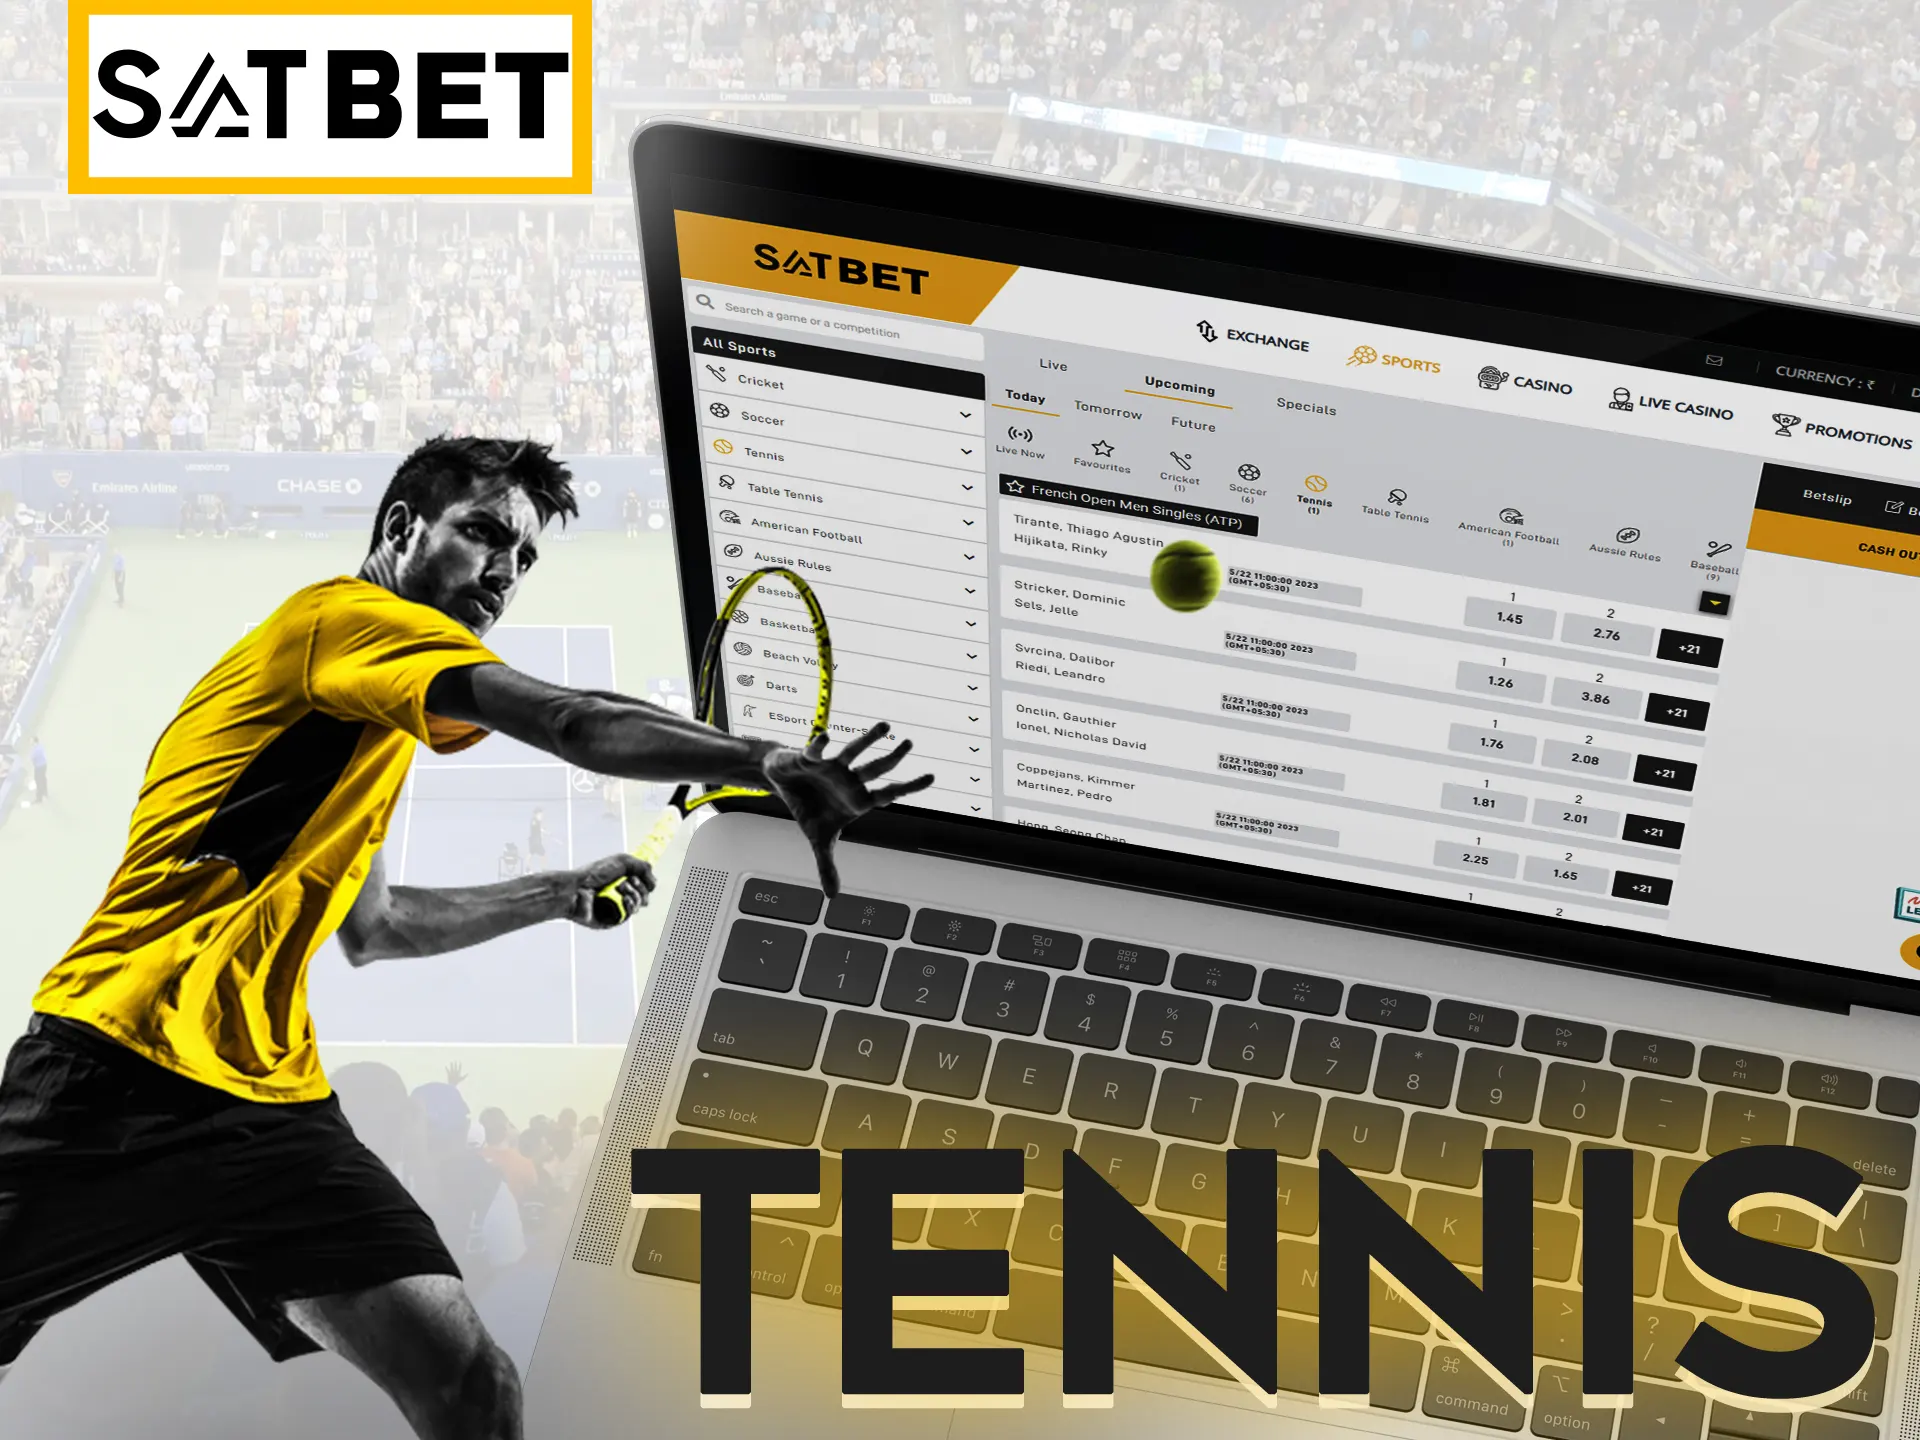 Bet on legendary tennis players at Satbet.